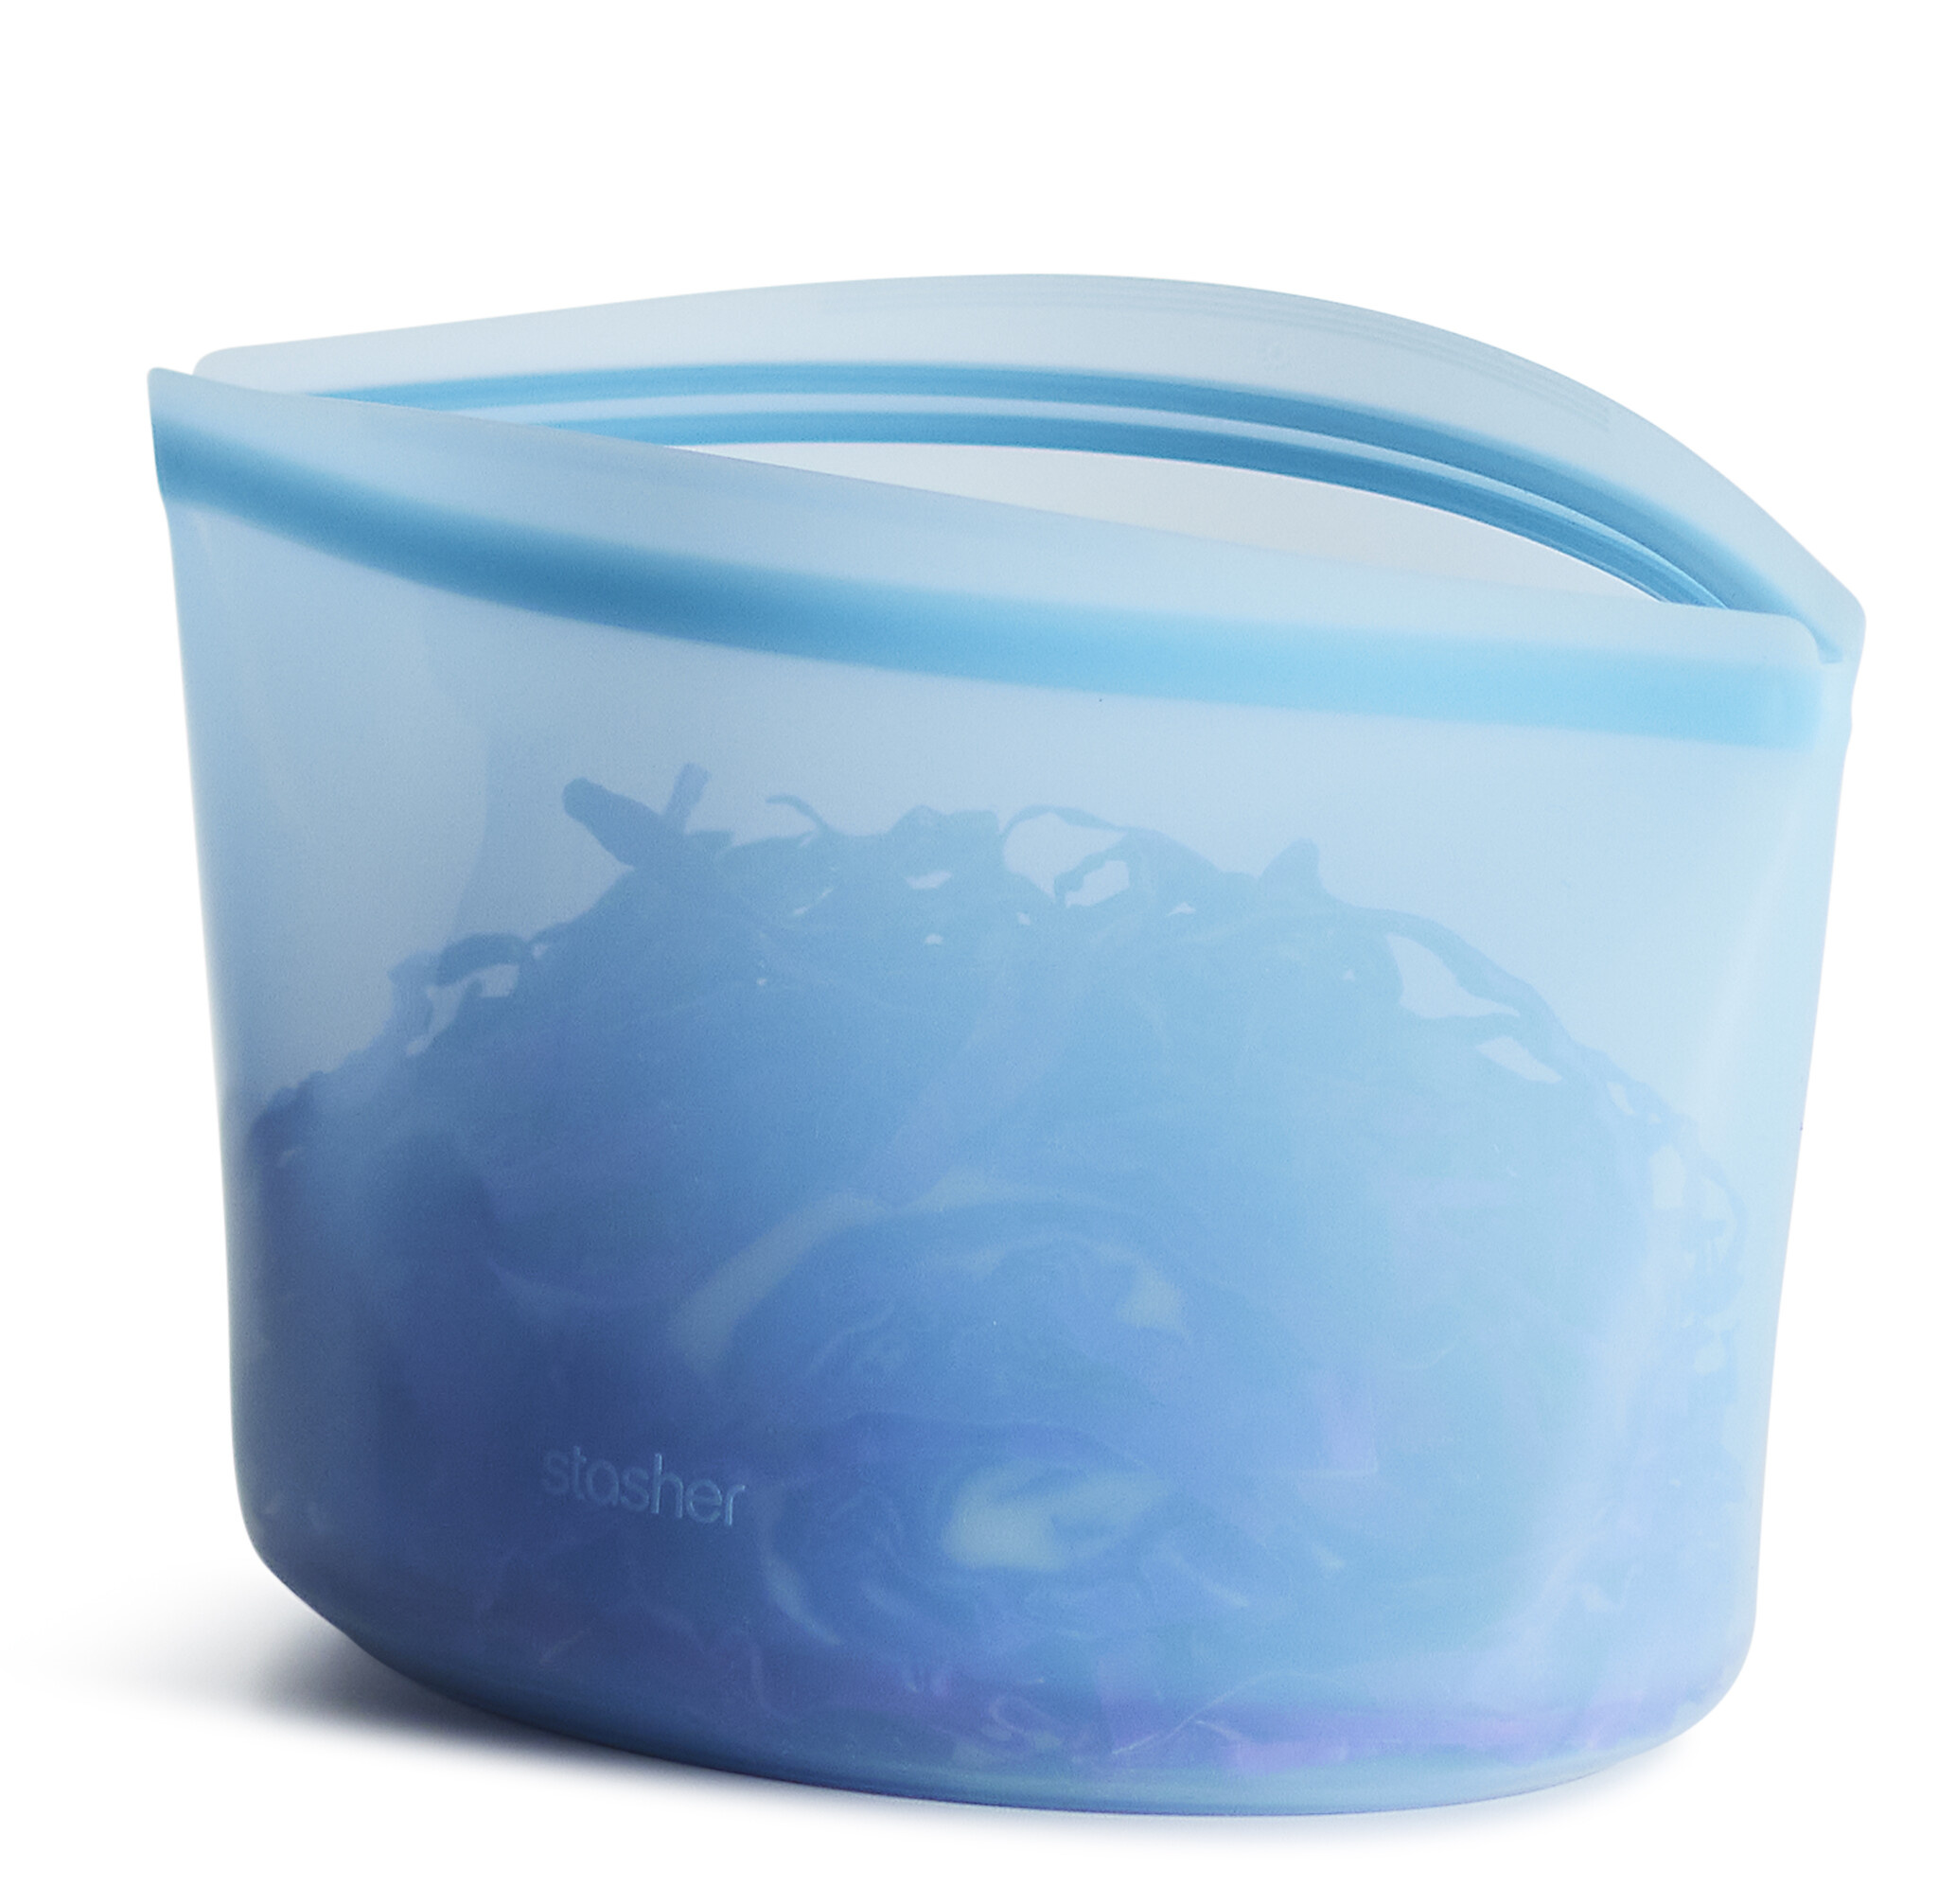 Stasher Silicone 8 Cup Bowl 1,9l - Blue - Shalimo